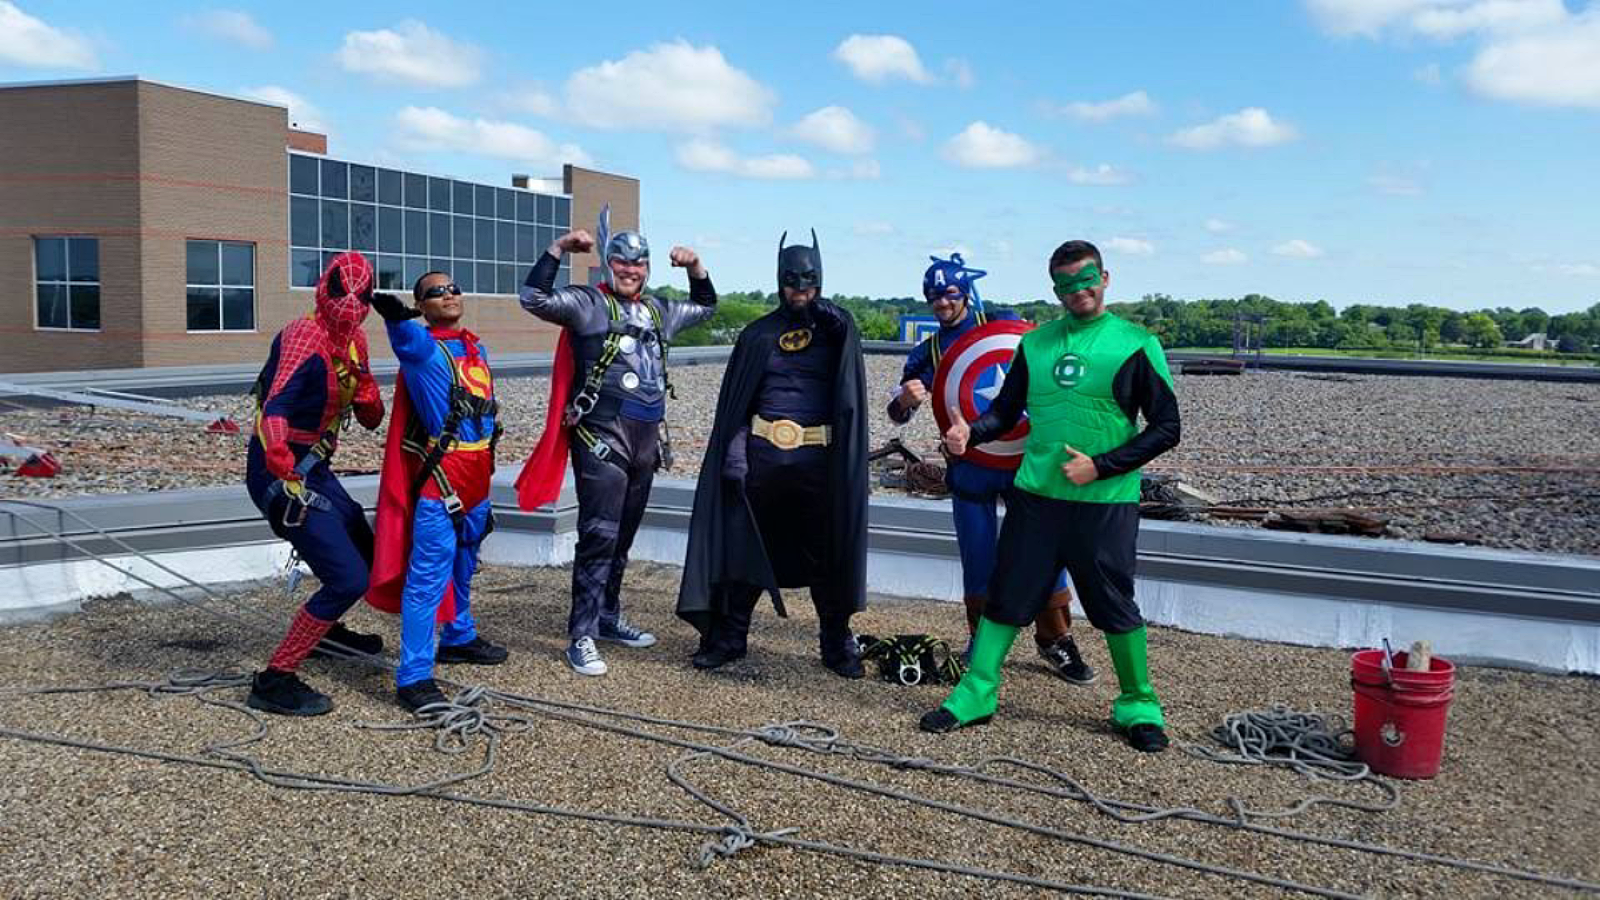 window cleaners dressed as super heroes at children's hospital